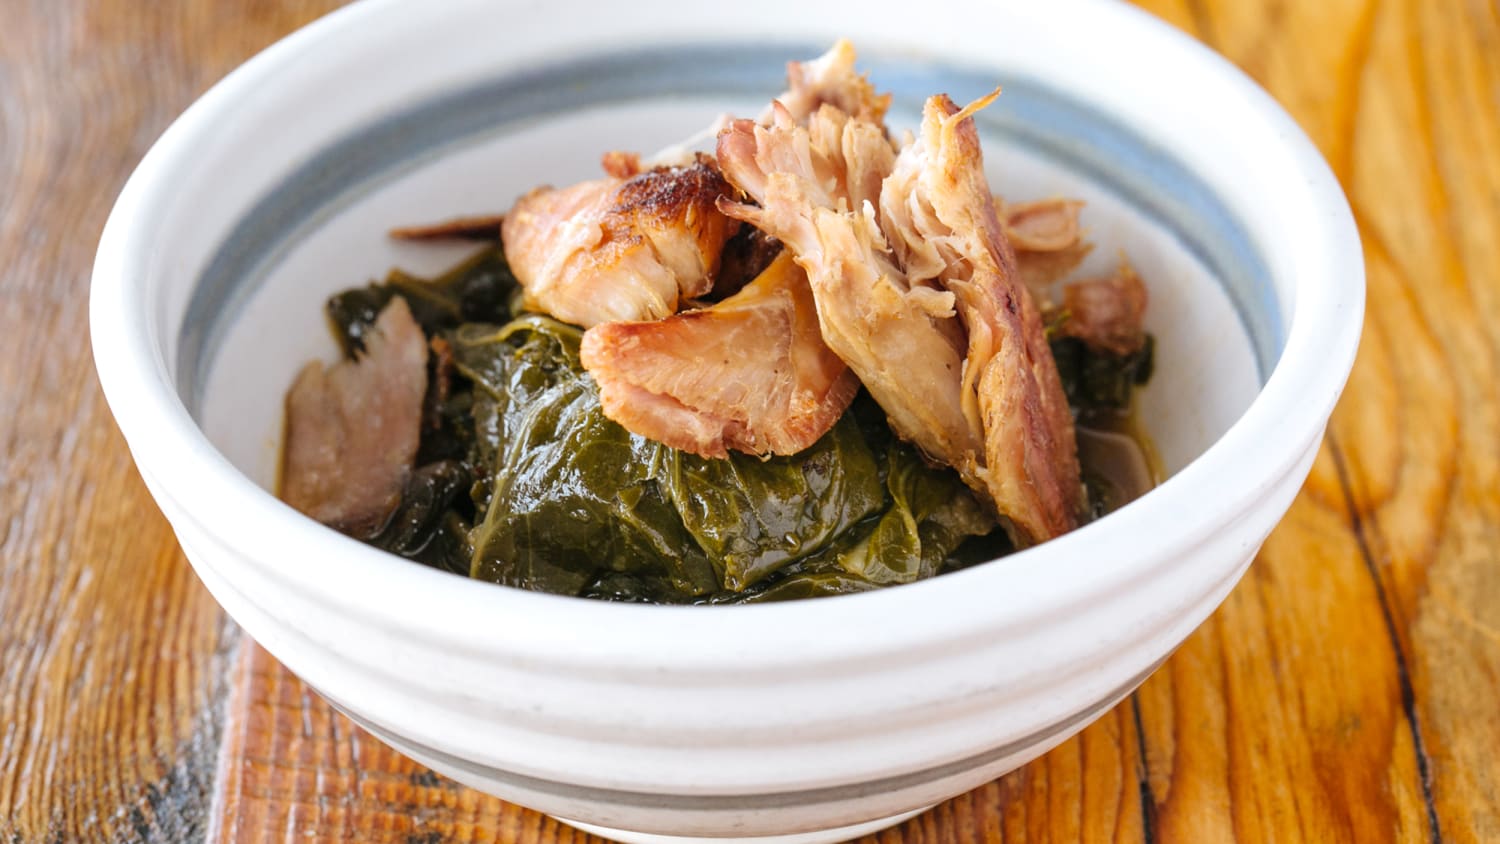 Collard greens with smoked turkey takes love, but it's worth it